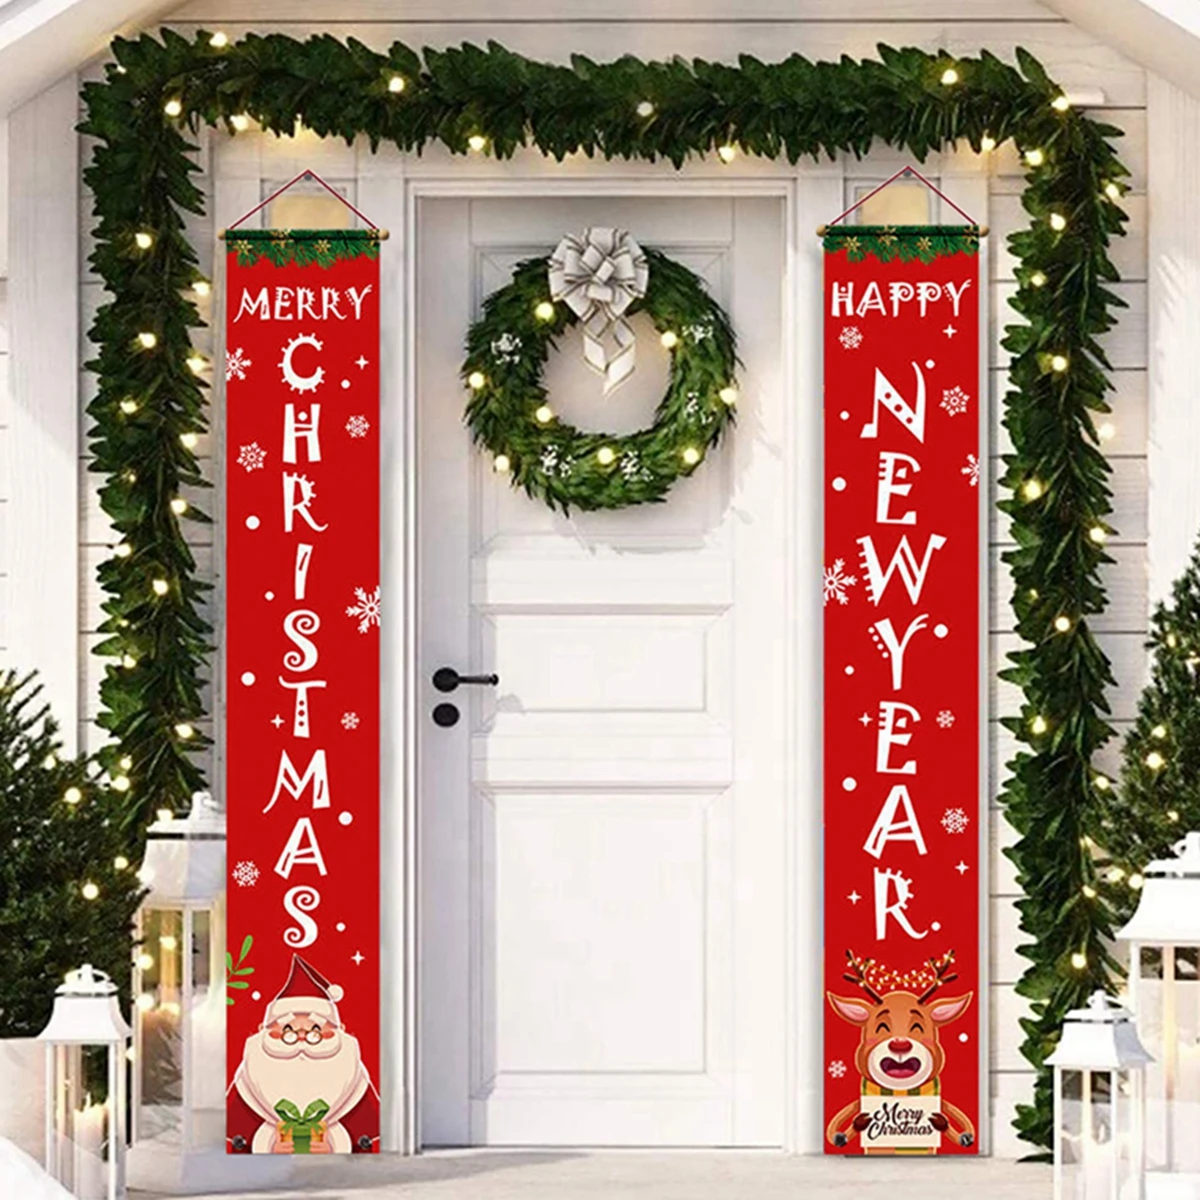 Large Red Christmas Hanging Decorative Banner Signs for Xmas Outdoor or Indoor House Home Party Decoration Christmas Tree OLOPE Merry Christmas Banner Outdoor Yard Decorations 